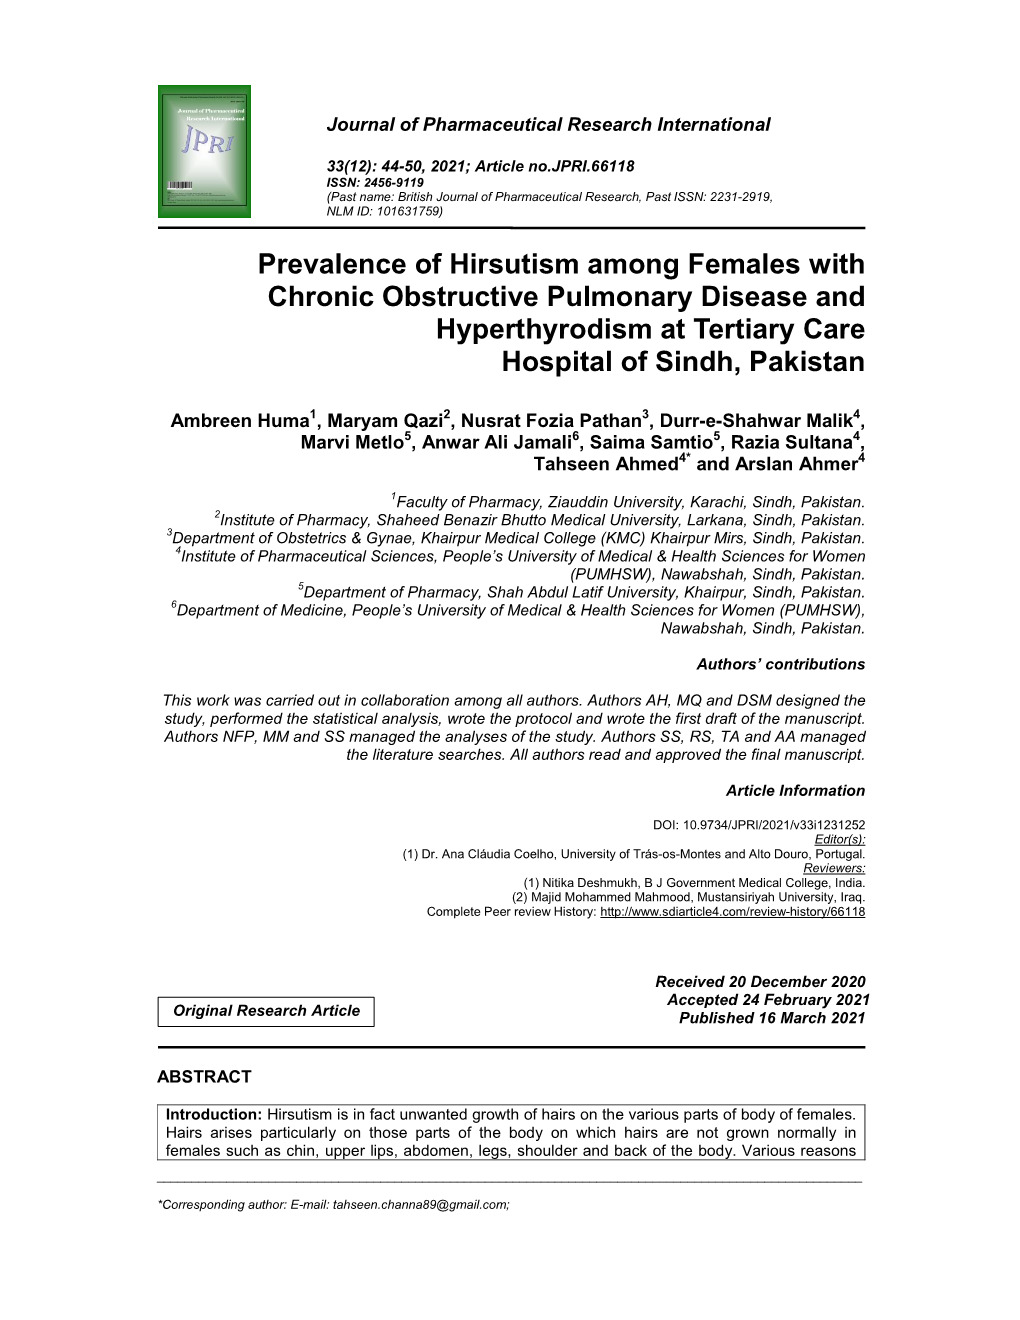 Prevalence of Hirsutism Among Females with Chronic Obstructive Pulmonary Disease and Hyperthyrodism at Tertiary Care Hospital of Sindh, Pakistan